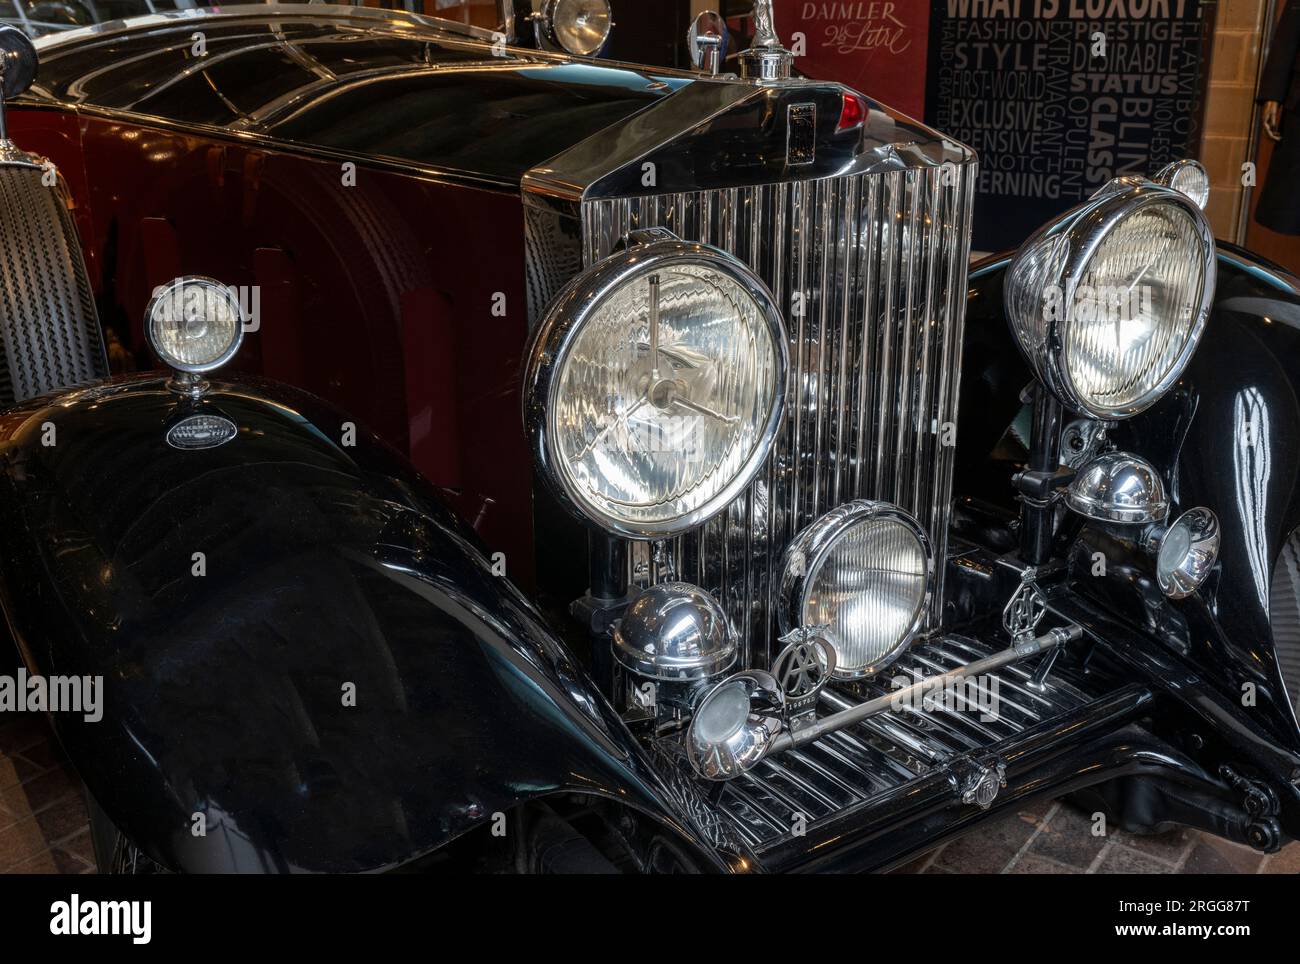 1933 Rolls-Royce 40/50 Phantom II in mostra al National Motor Museum, Beaulieu, New Forest, Hampshire, Inghilterra, REGNO UNITO. - ALY 565 Foto Stock